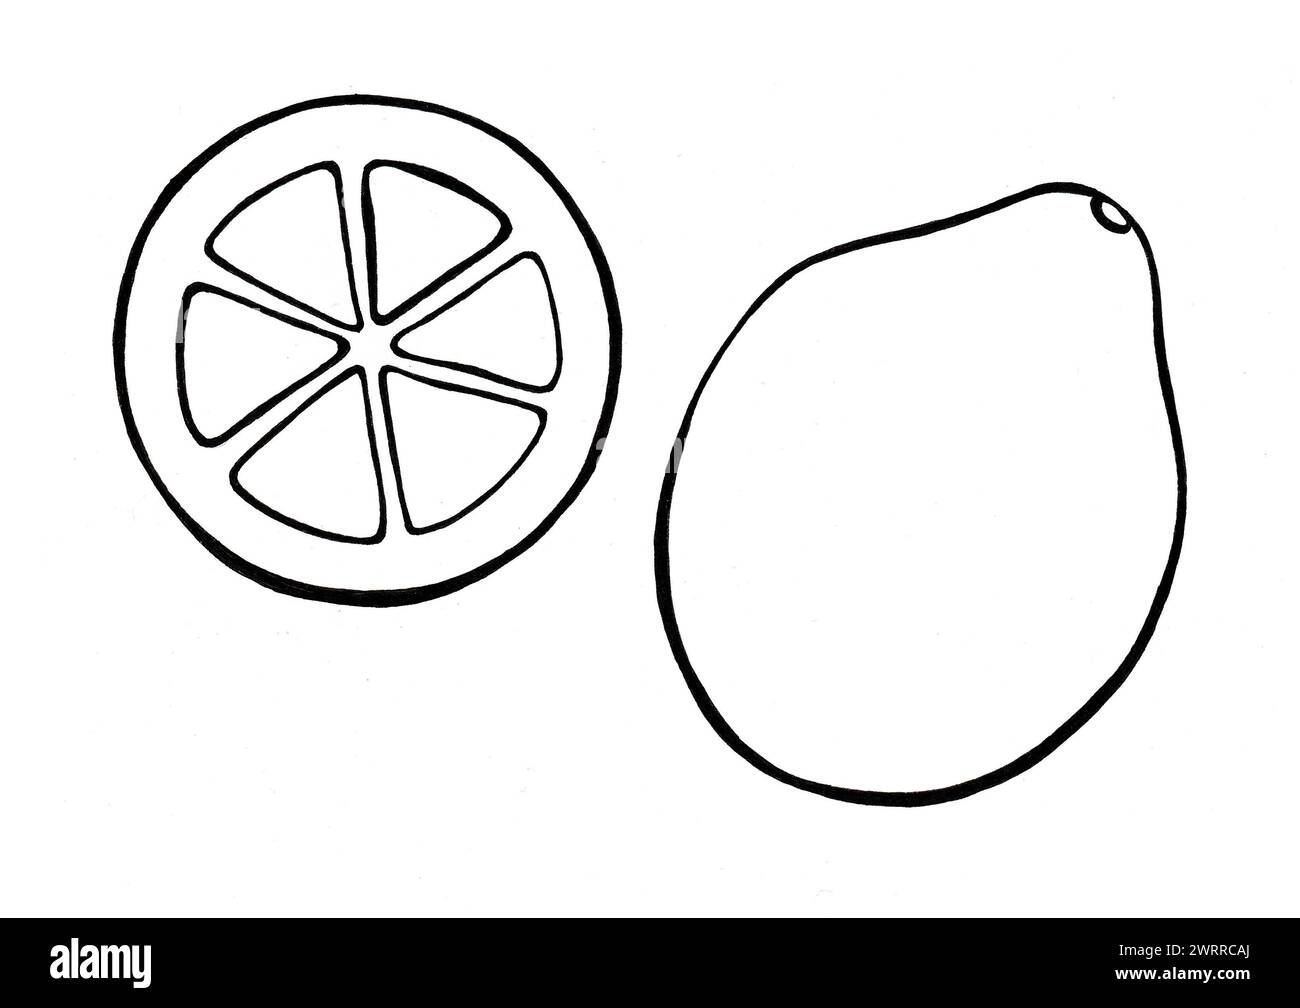 A set of two lemons. A whole lemon and a slice of a ring. Black outline drawing. Simplified illustration. Isolated on white background. Printmaking st Stock Photo